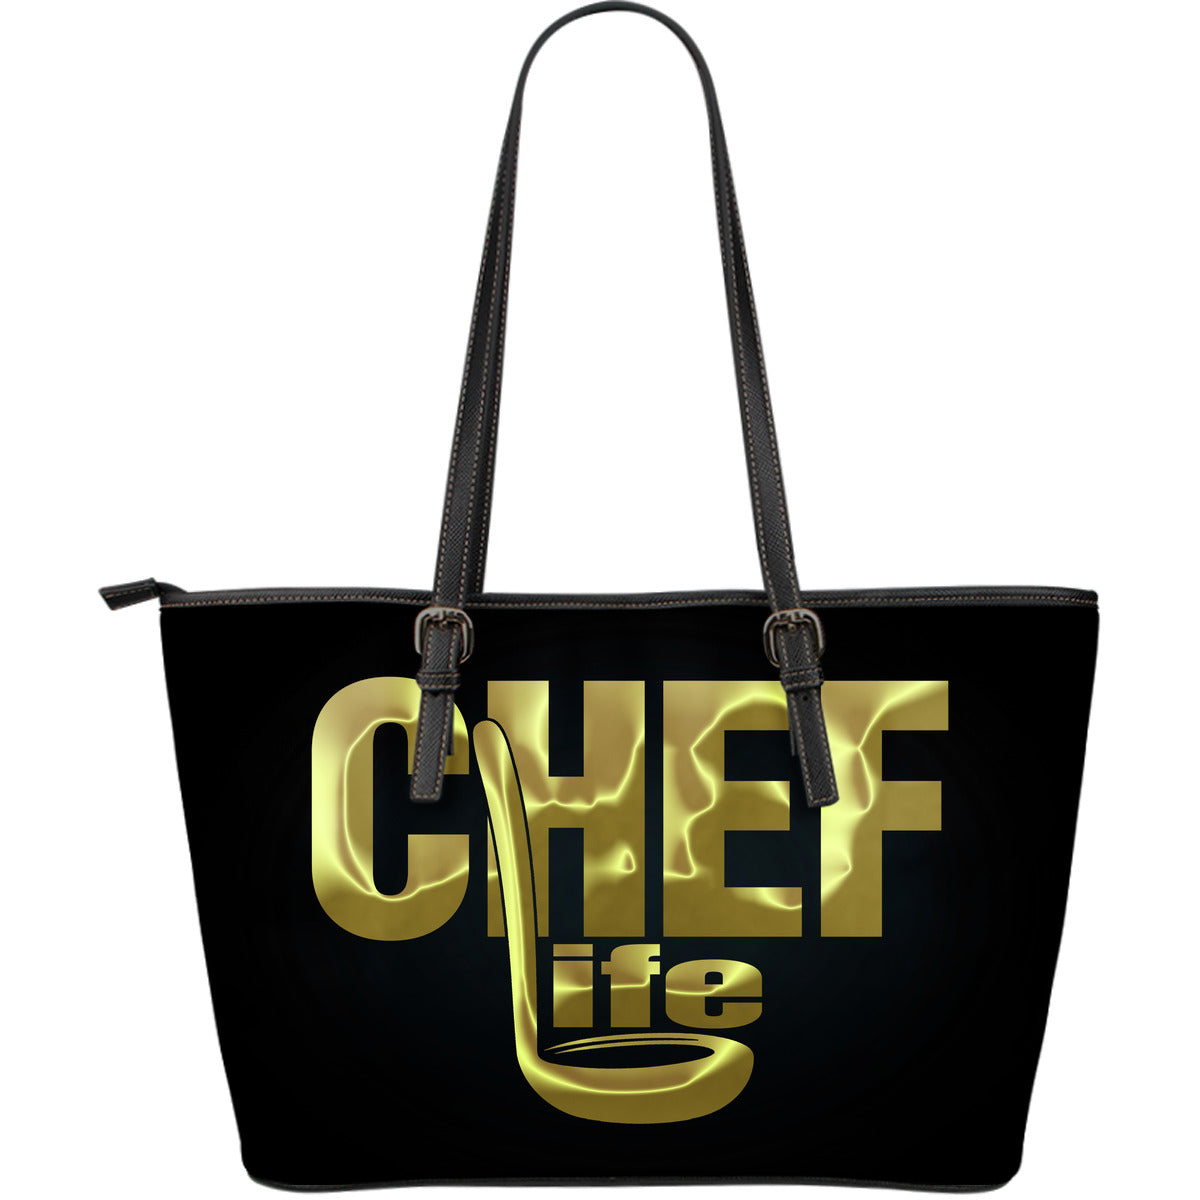 CHEF LIFE LARGE TOTE BAG - JaZazzy 